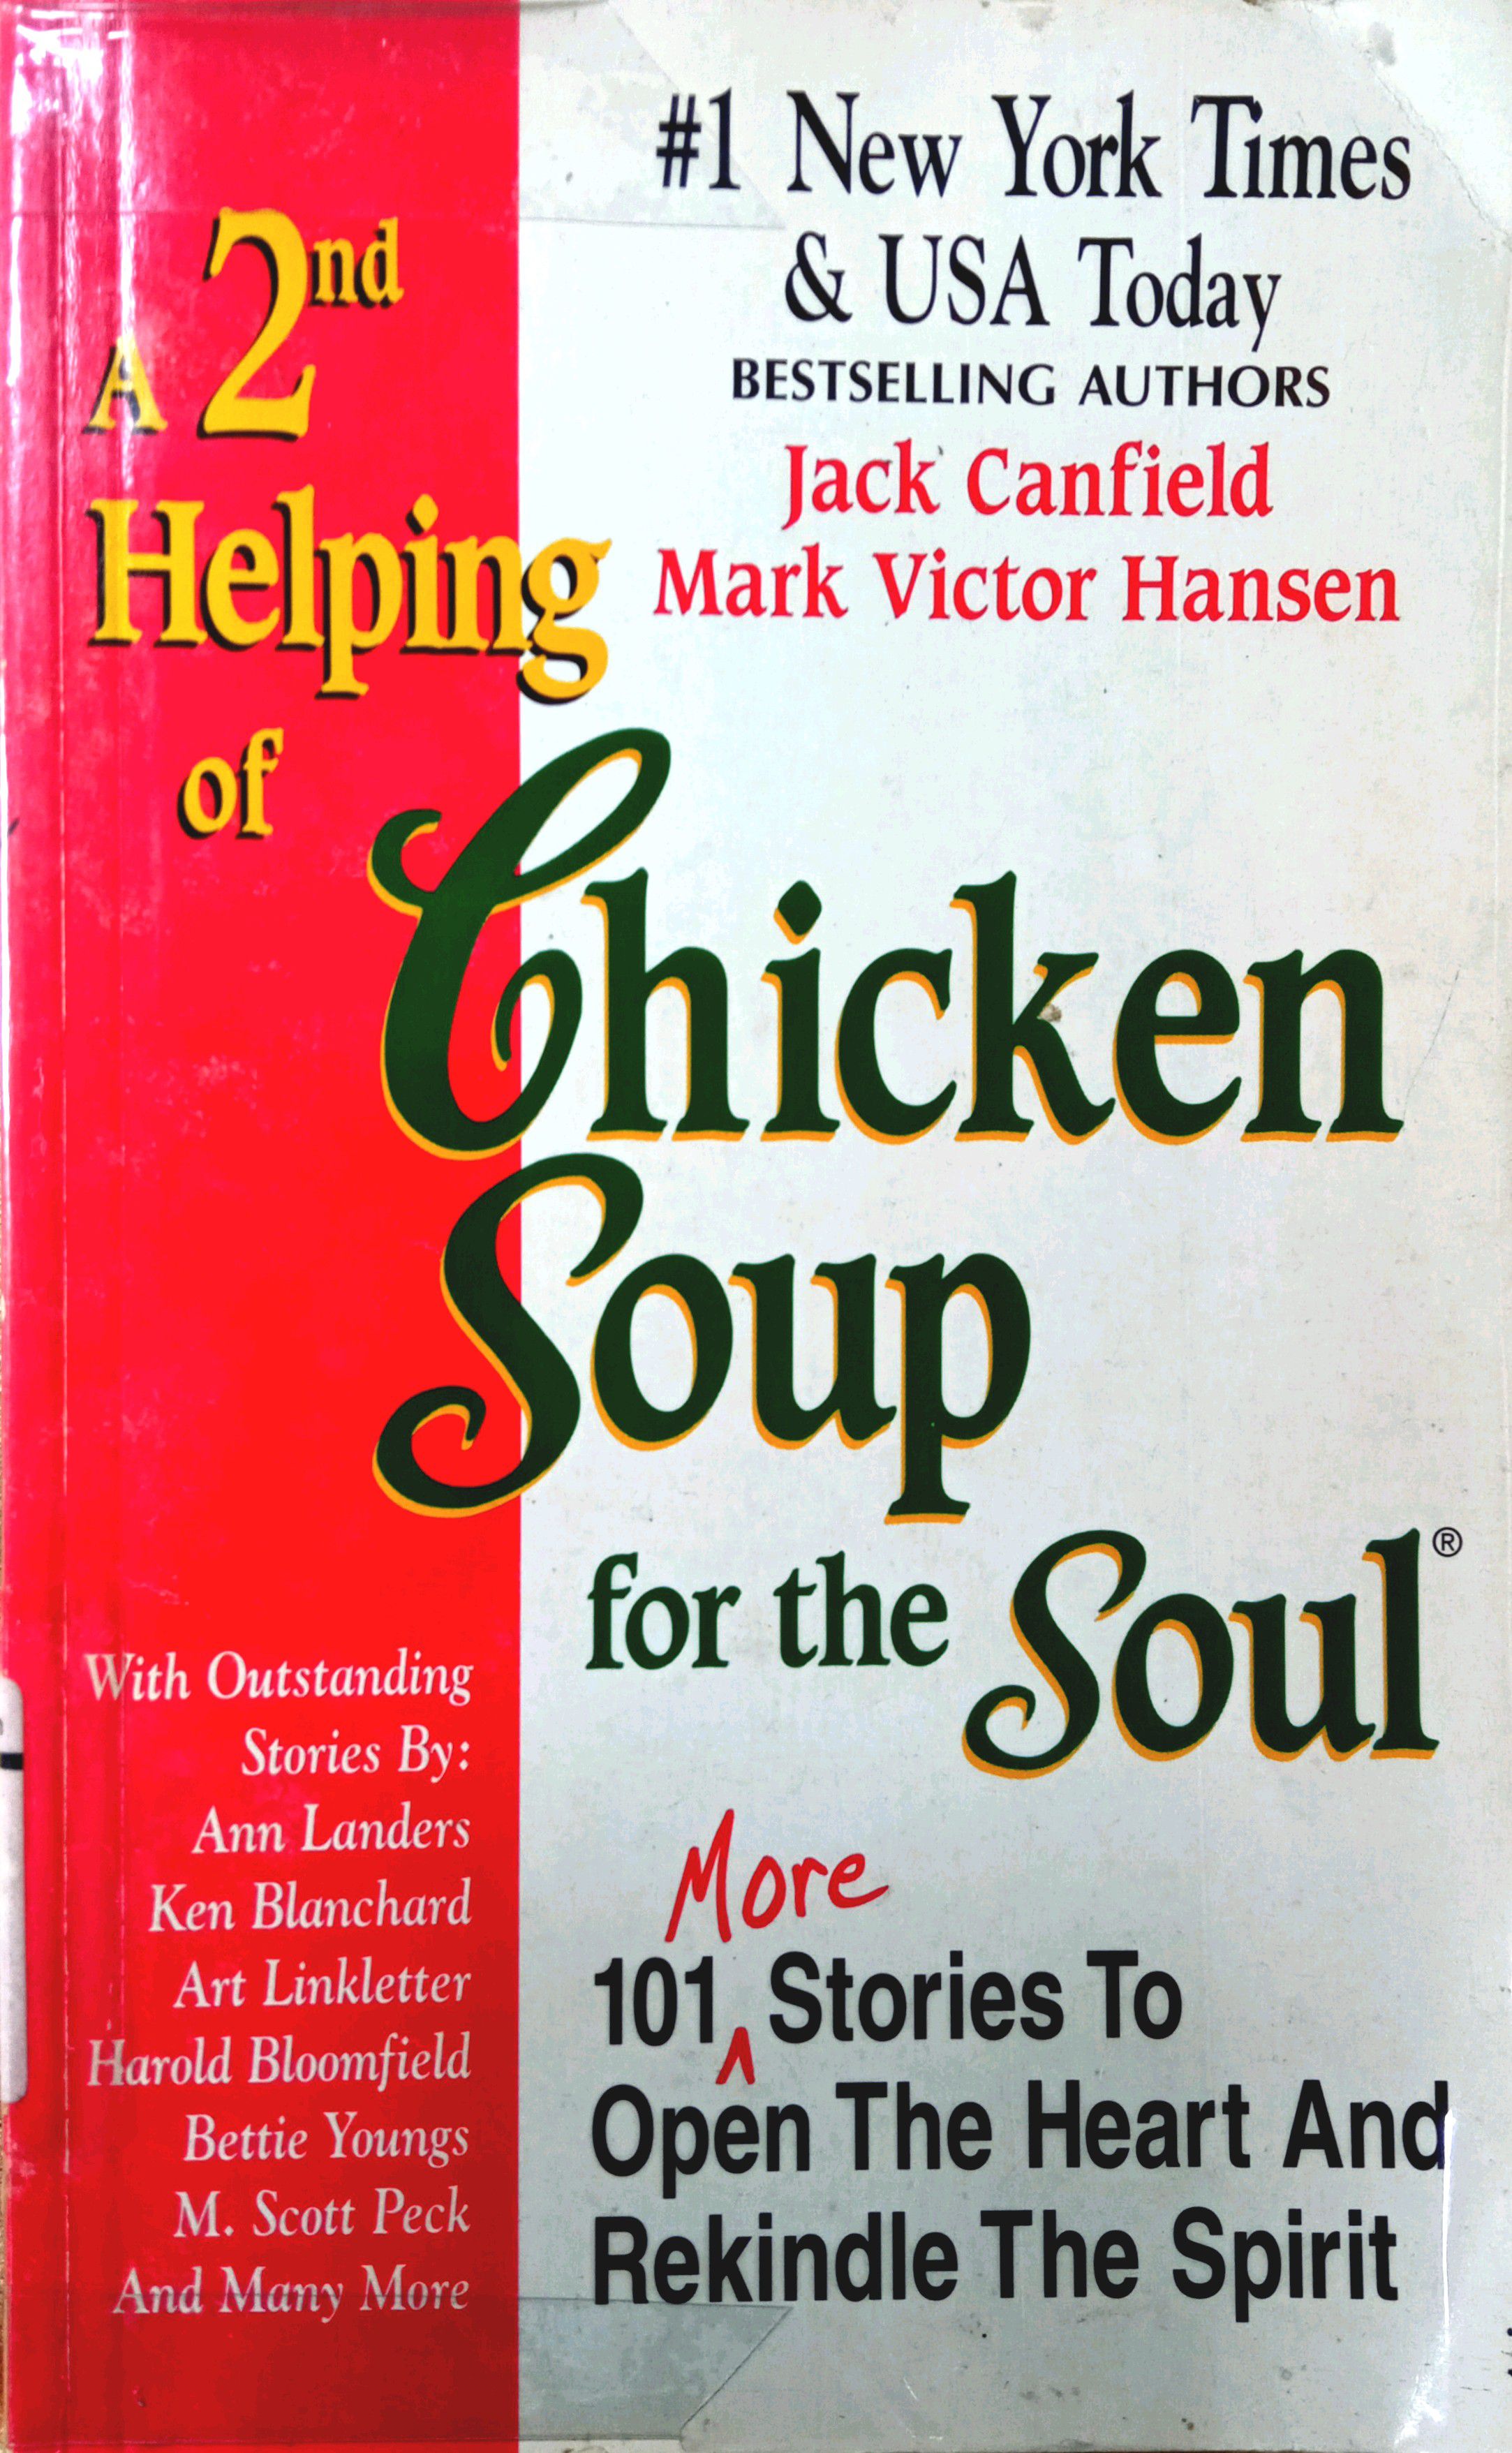 A 2ND HELPING OF CHICKEN SOUP FOR THE SOUL